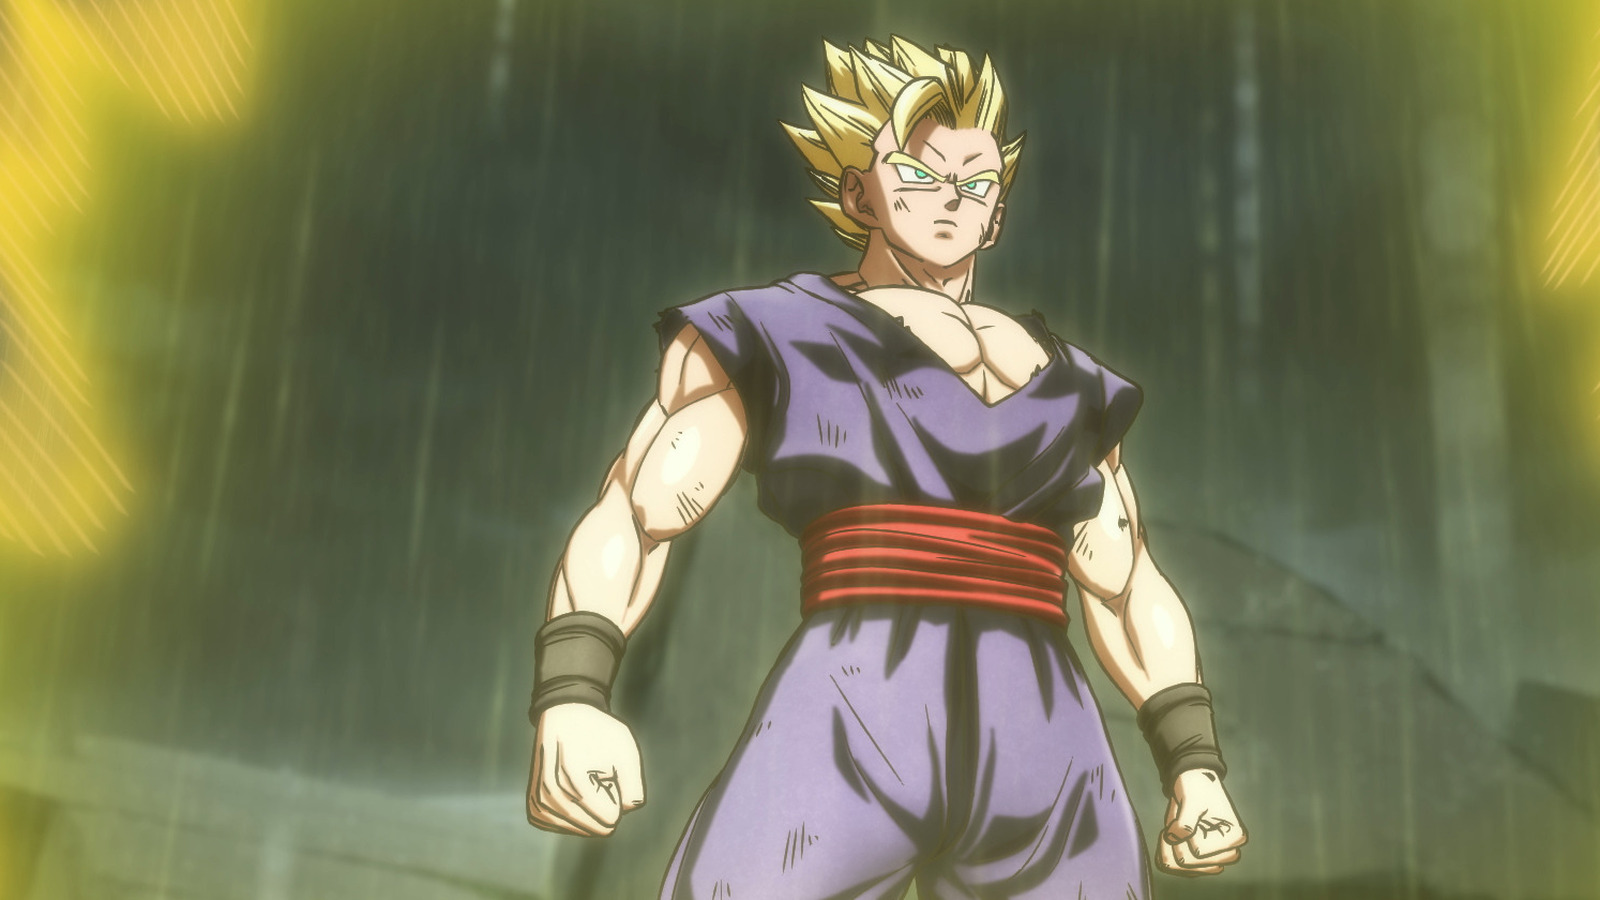 Dragon Ball Super: Super Hero character concepts revealed at SDCC